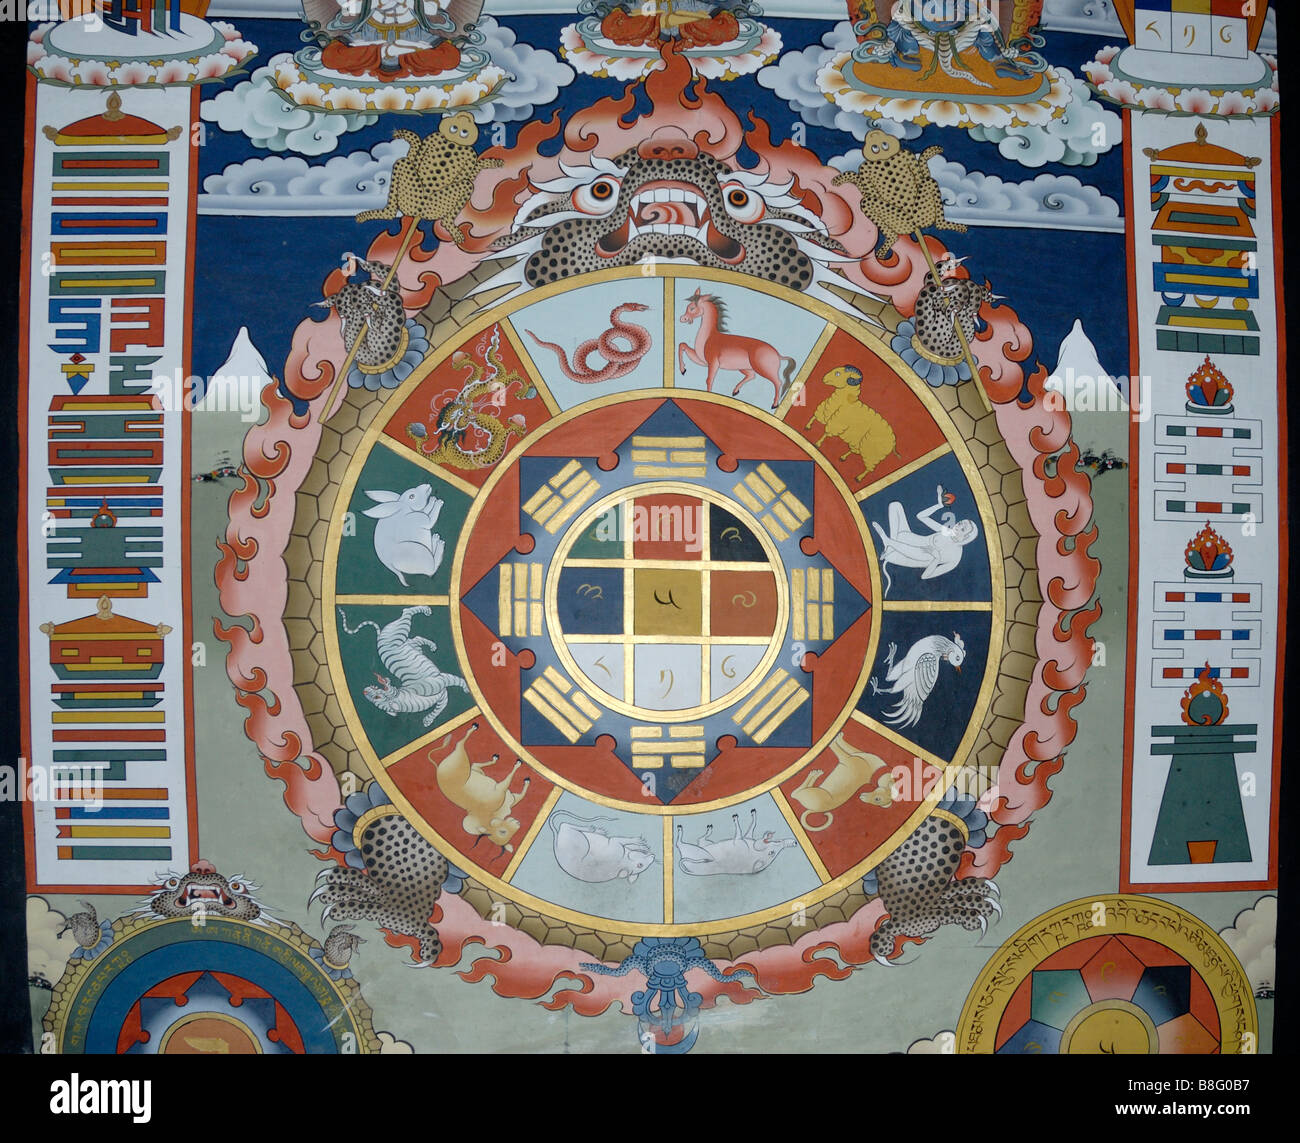 A traditional Tibetan calendar and astrological diagram painted on the